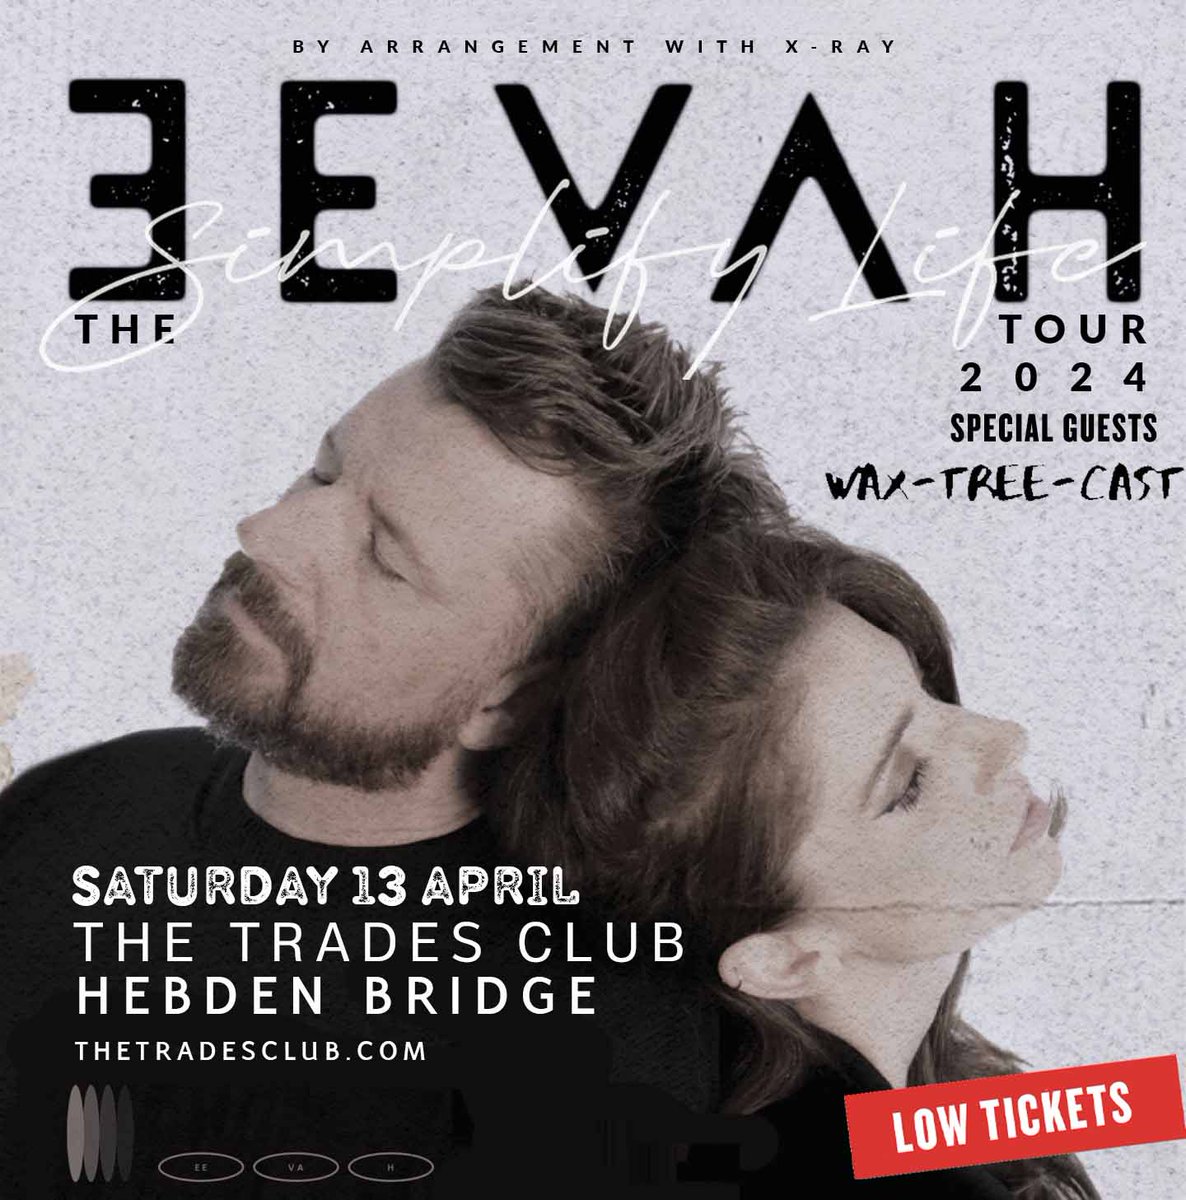 Tickets running low for @eevahmusic with special guests @waxtreecastband tomorrow night at the Trades. Get them HERE >> thetradesclub.com/events/eevah